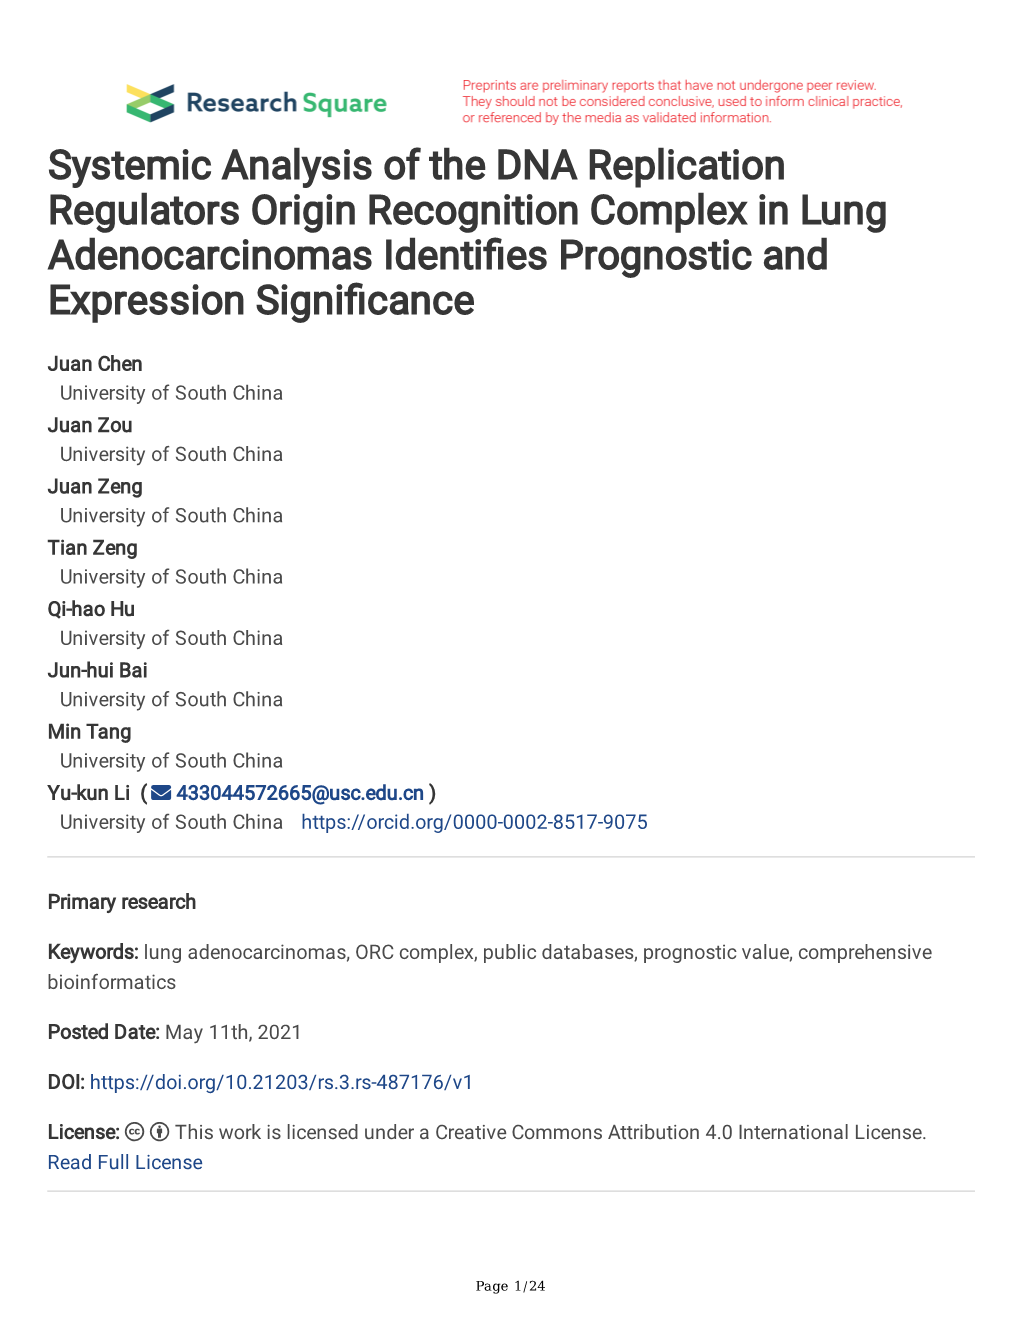 Systemic Analysis of the DNA Replication Regulators Origin Recognition Complex in Lung Adenocarcinomas Identifes Prognostic and Expression Signifcance